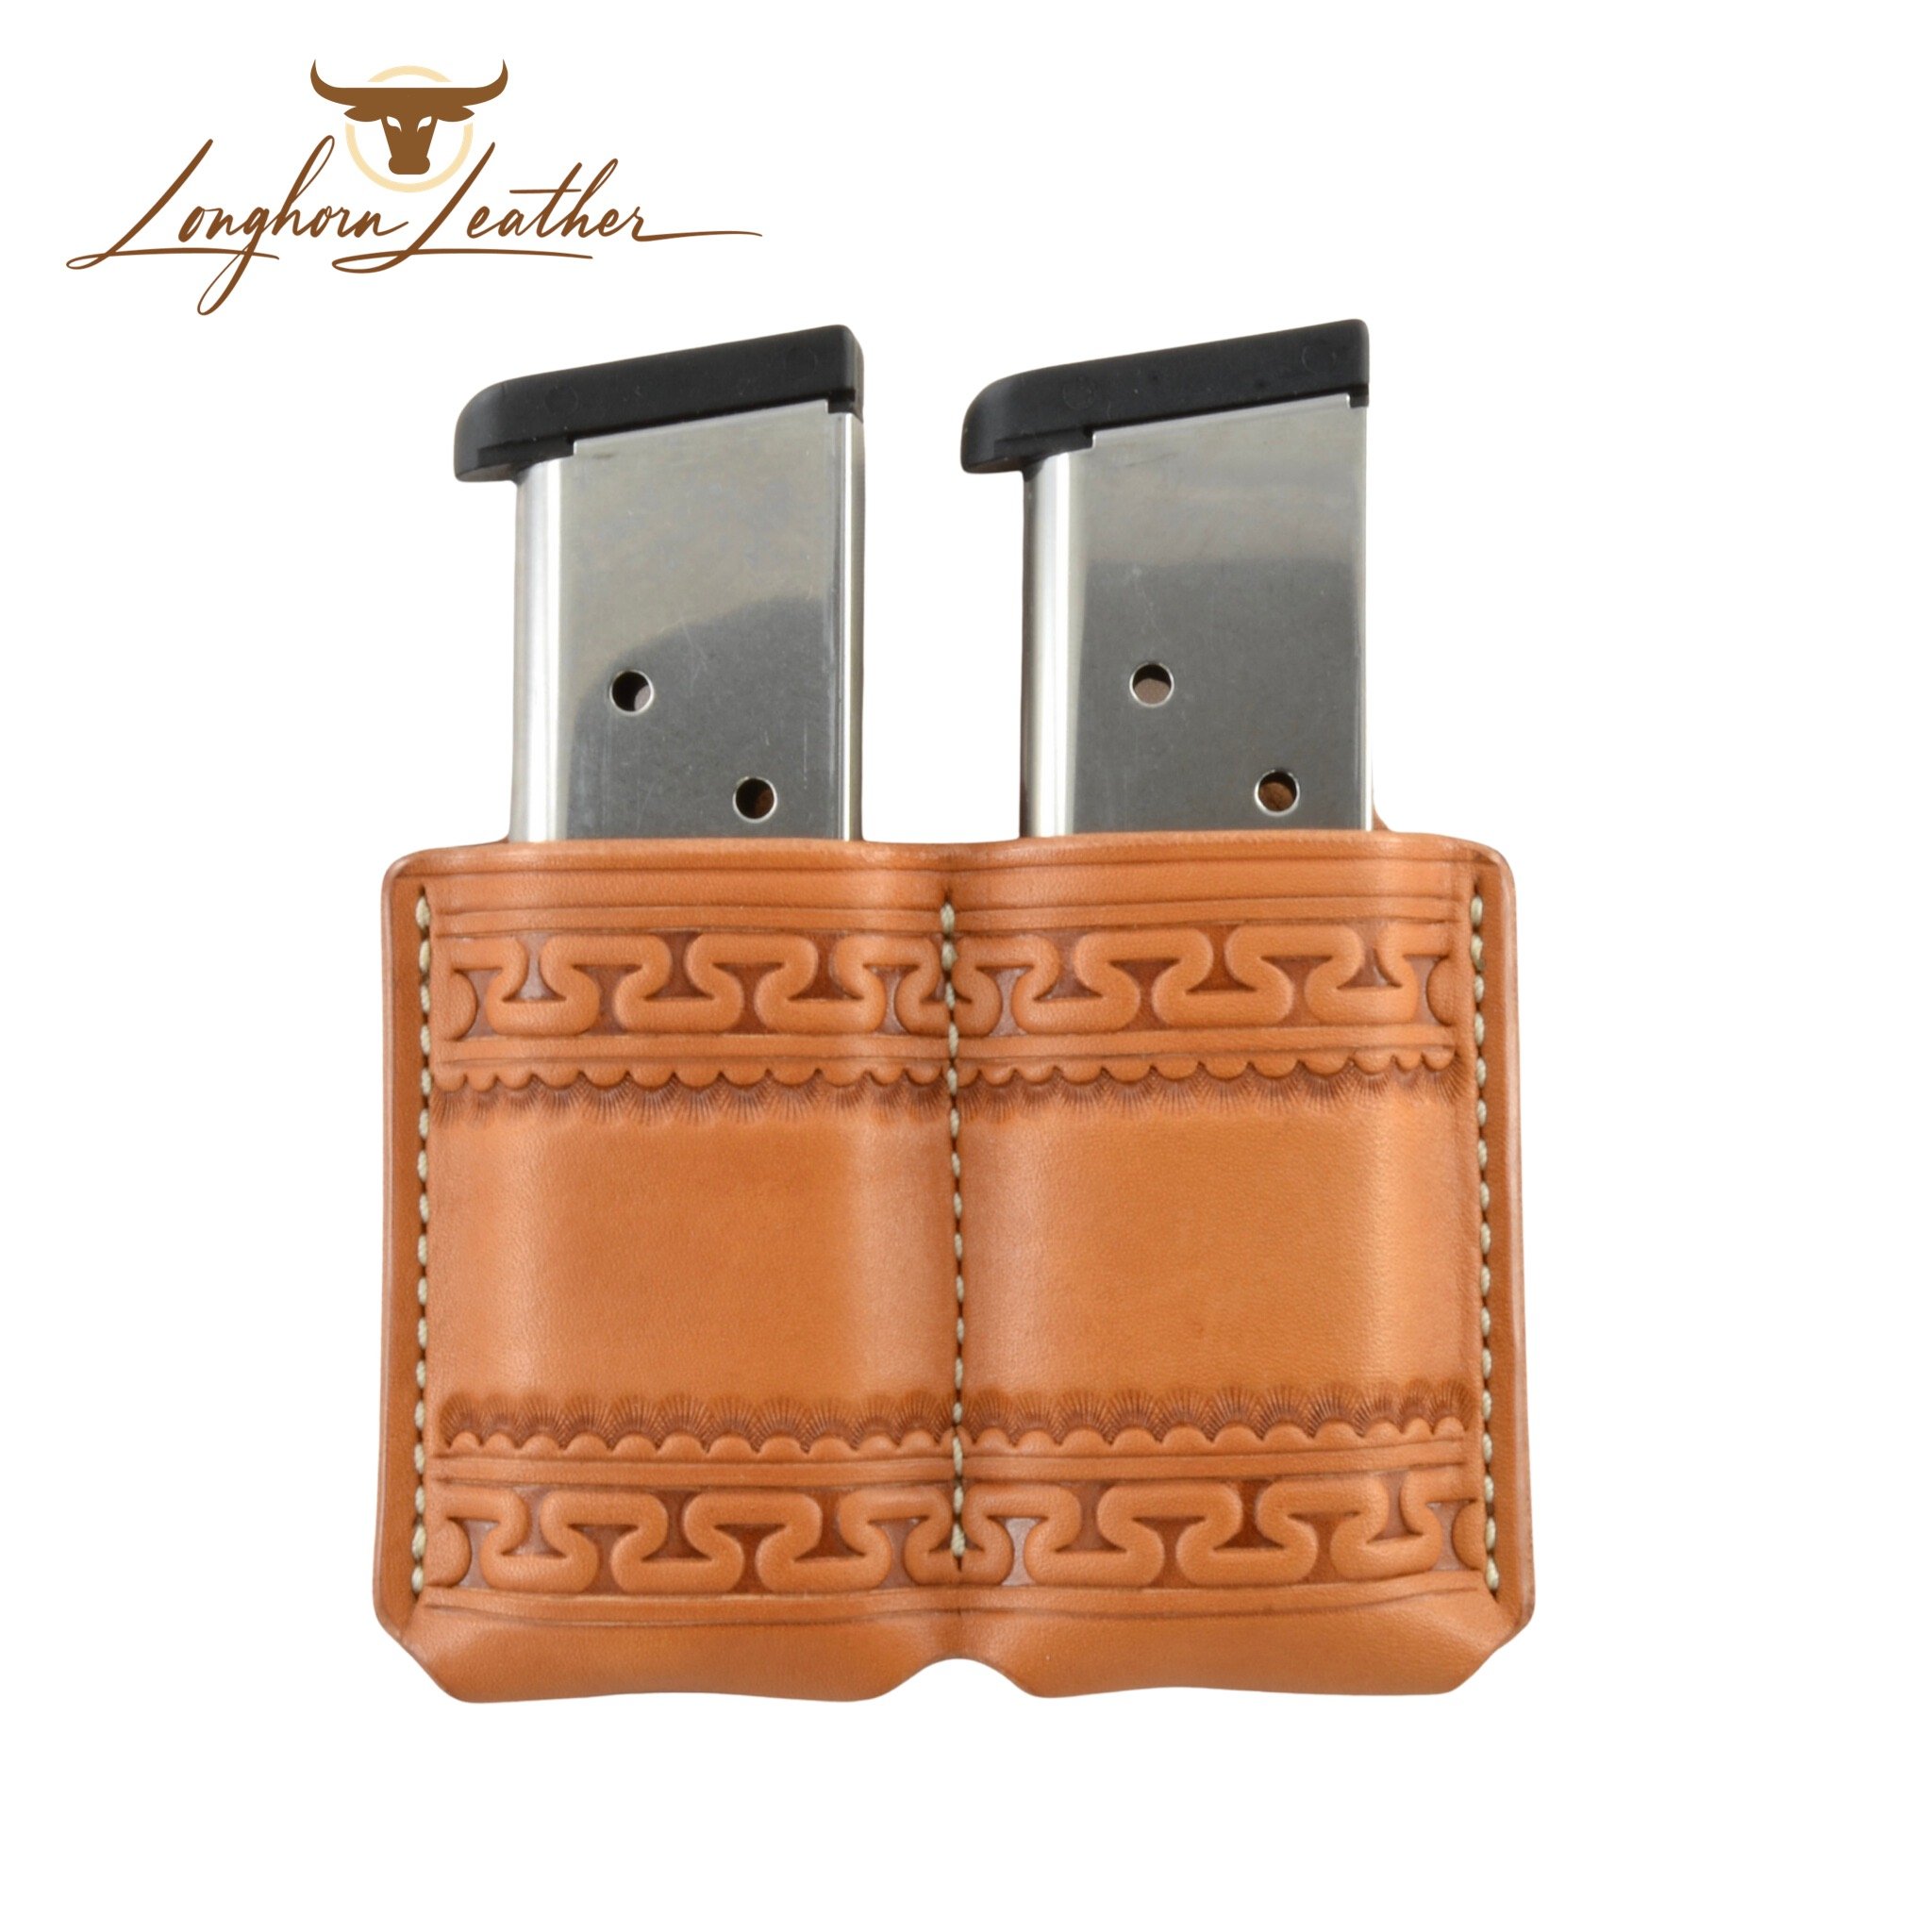  Custom leather 1911 double magazine carrier featuring the Yuma design.  Individually handcrafted at Longhorn Leather AZ